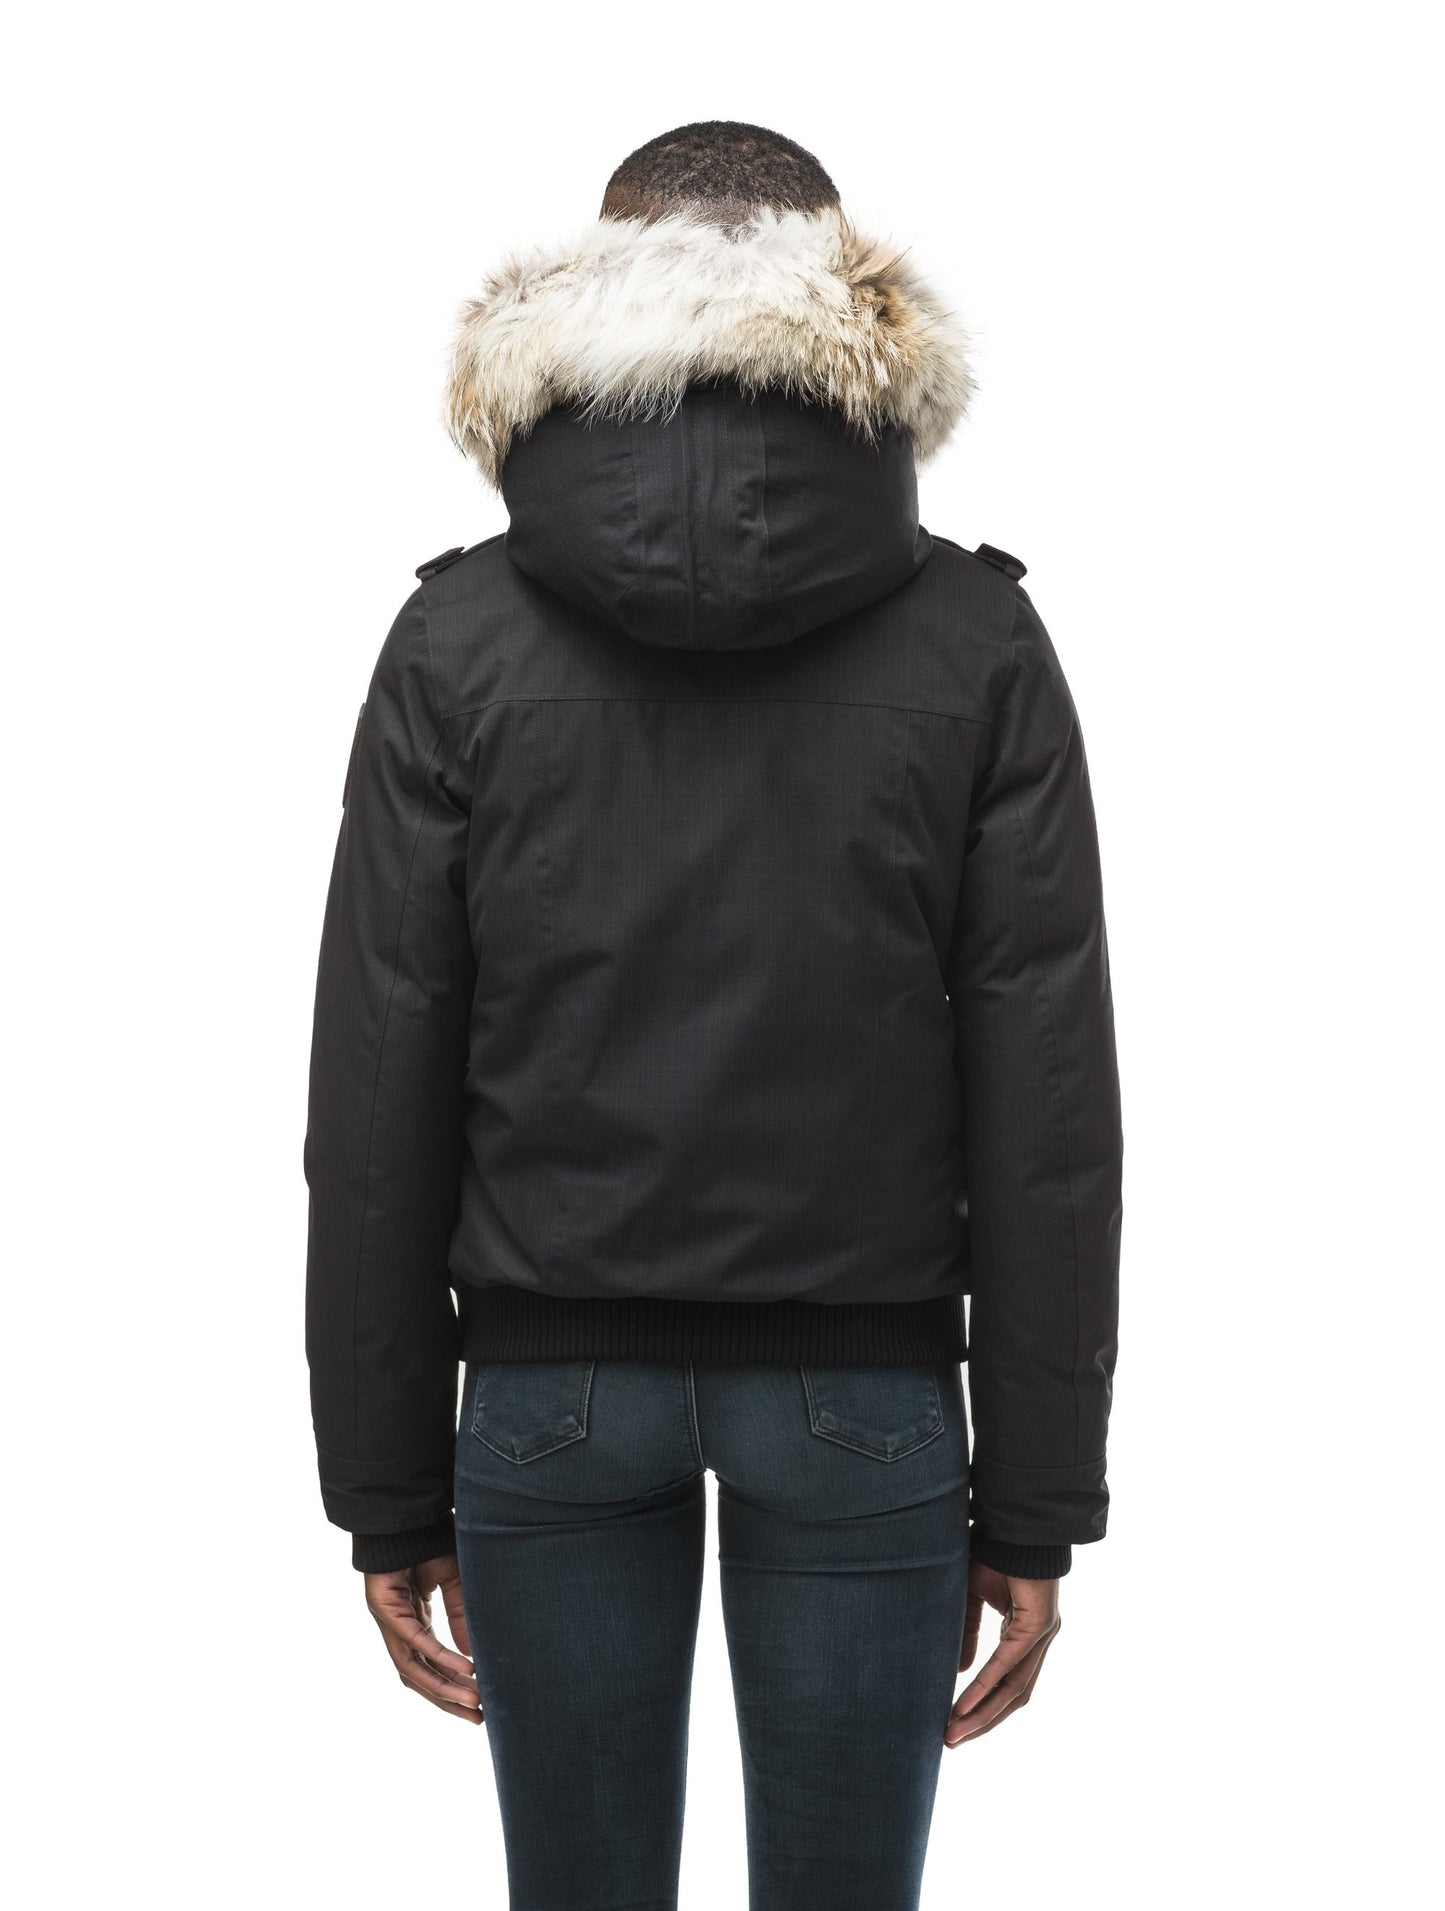 Women's bomber style down filled jacket with a removable hood and fur trim in CH Black